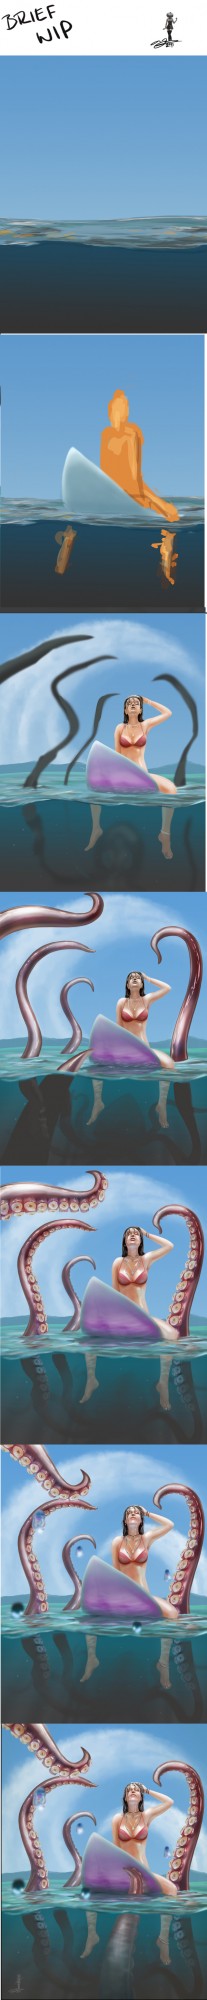 Surfer chick and tentacles - work in progress